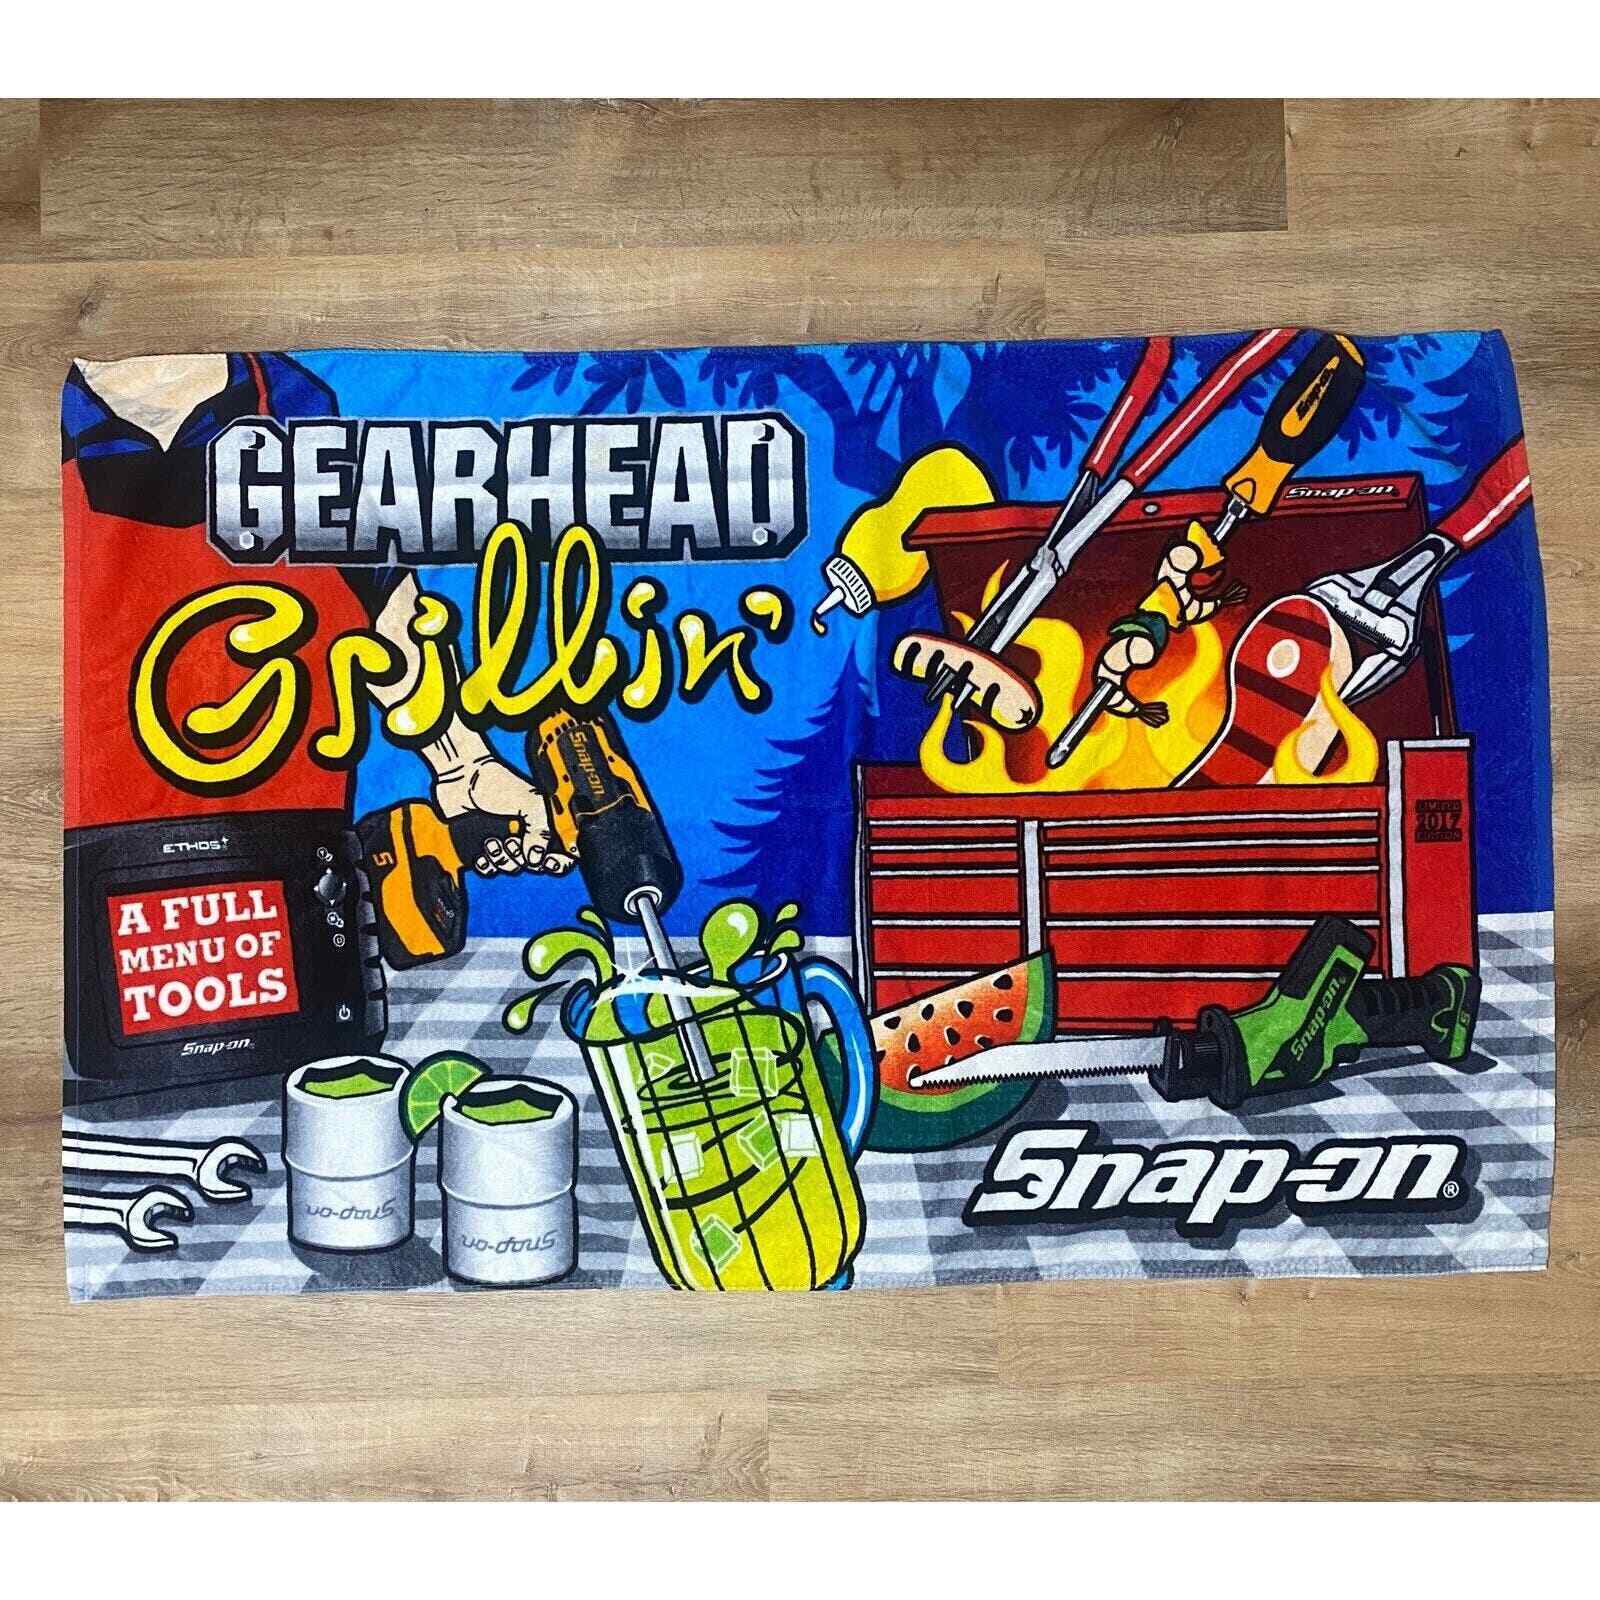 Snap-On Tools Gearhead Grillin 56x36 in Beach Towel 2017 Limited Edition Staples